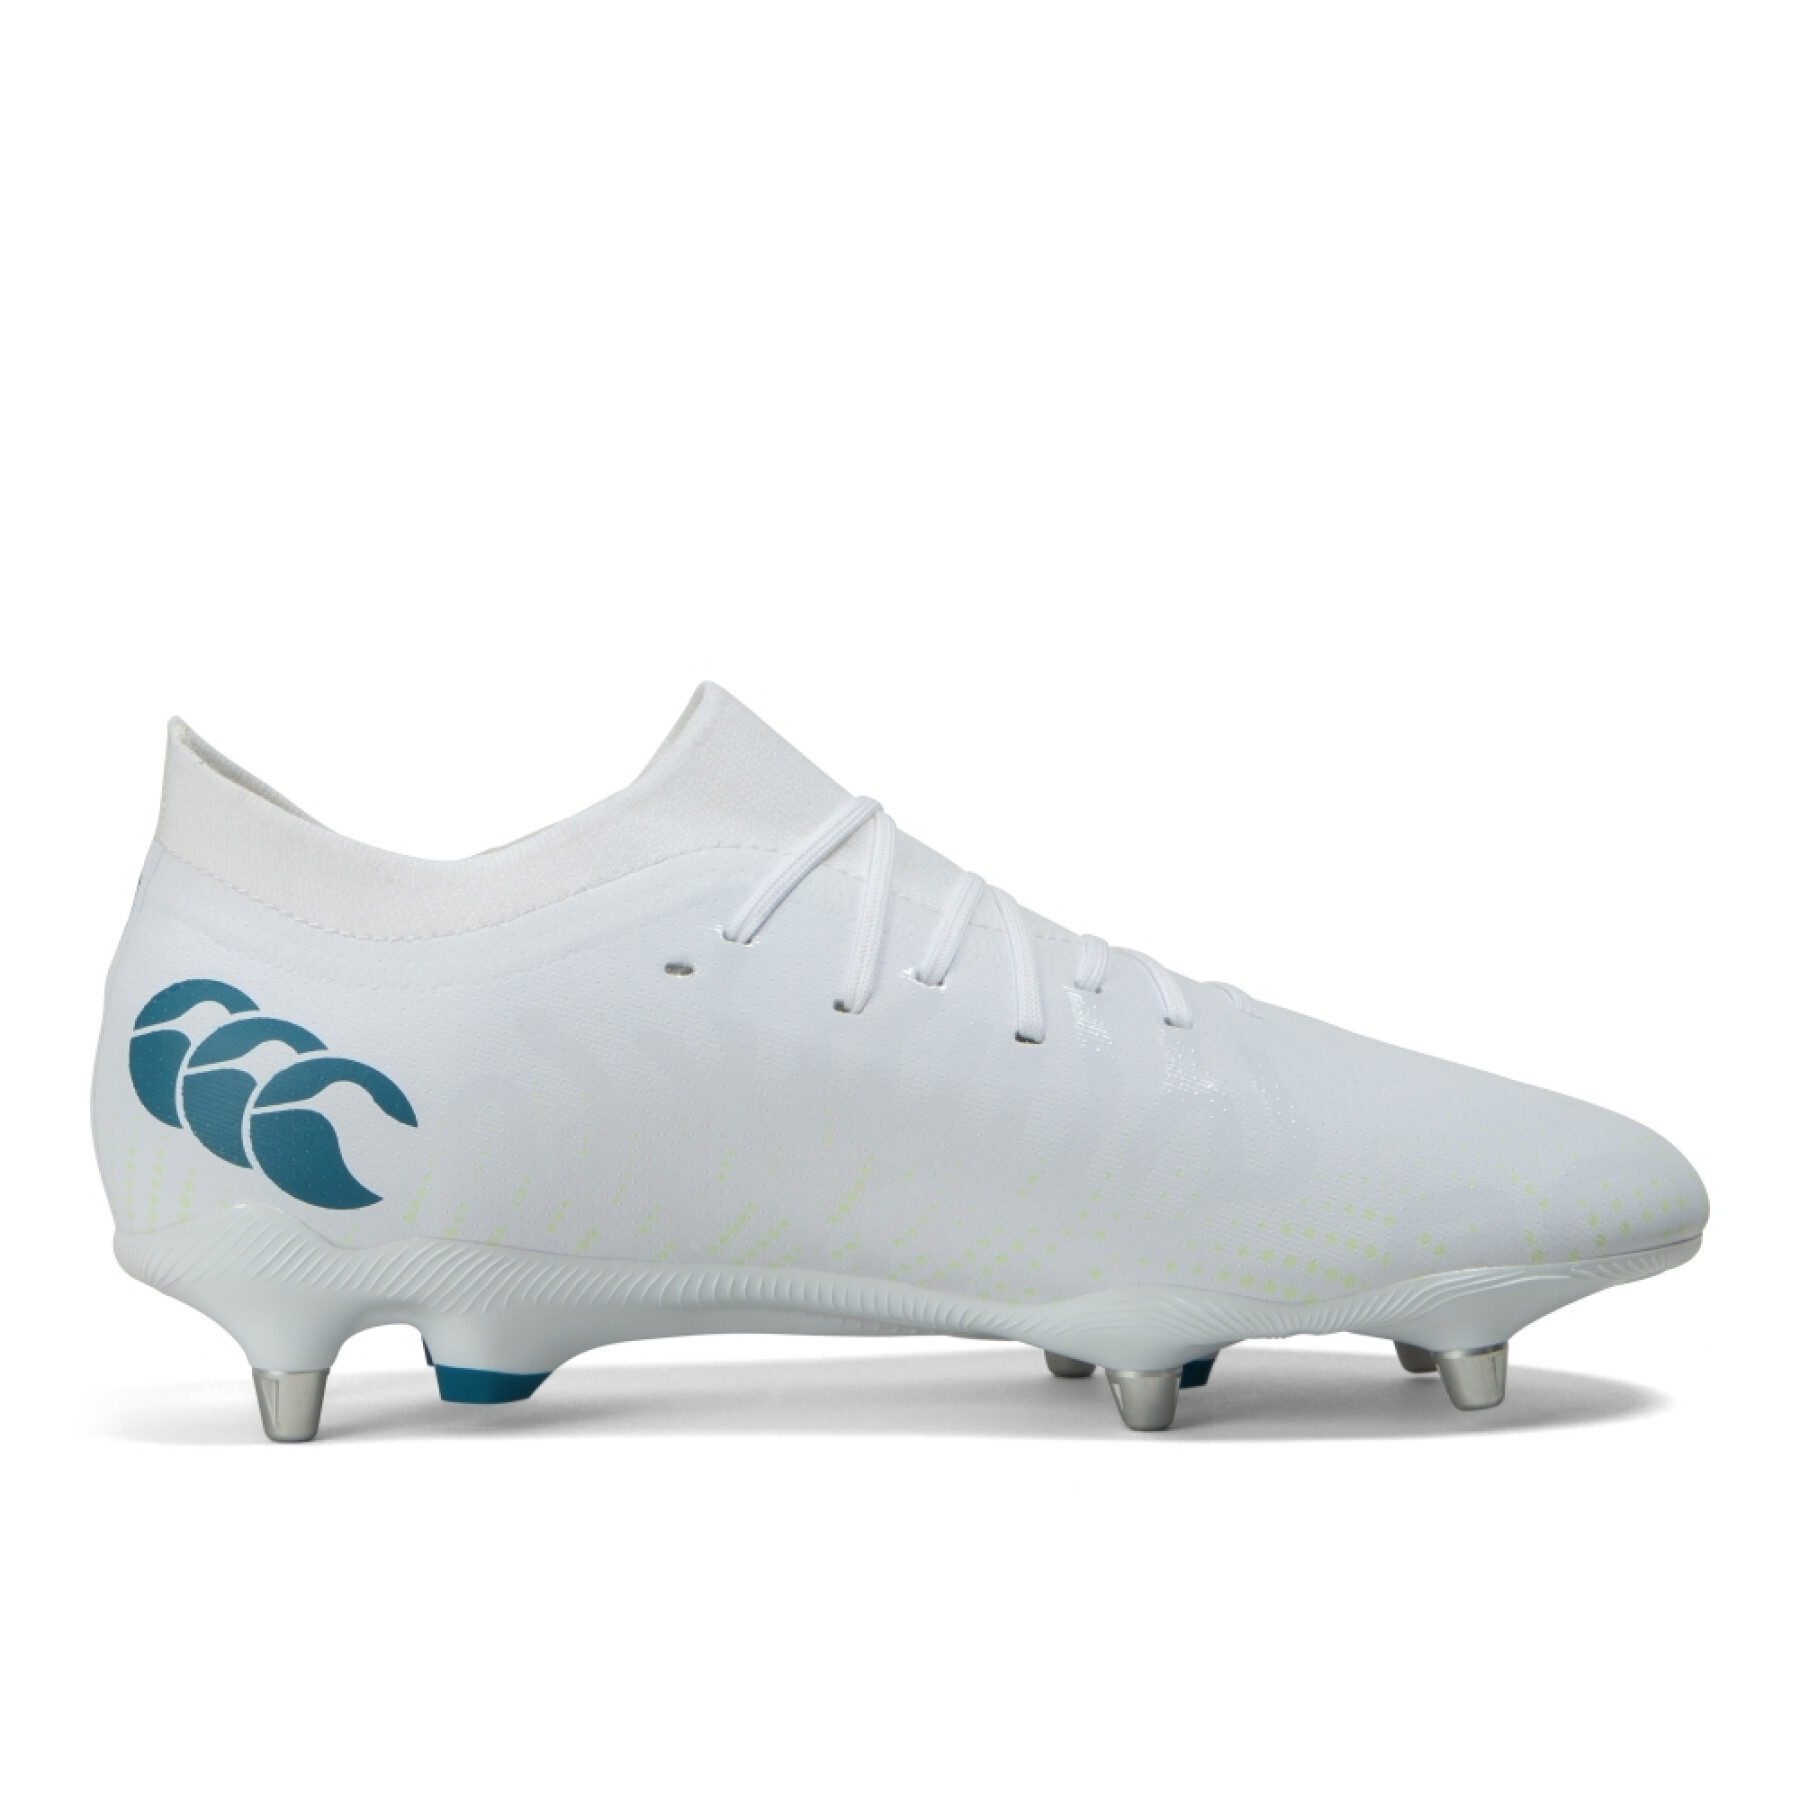 Rugby shoes Canterbury Speed Infinite Pro